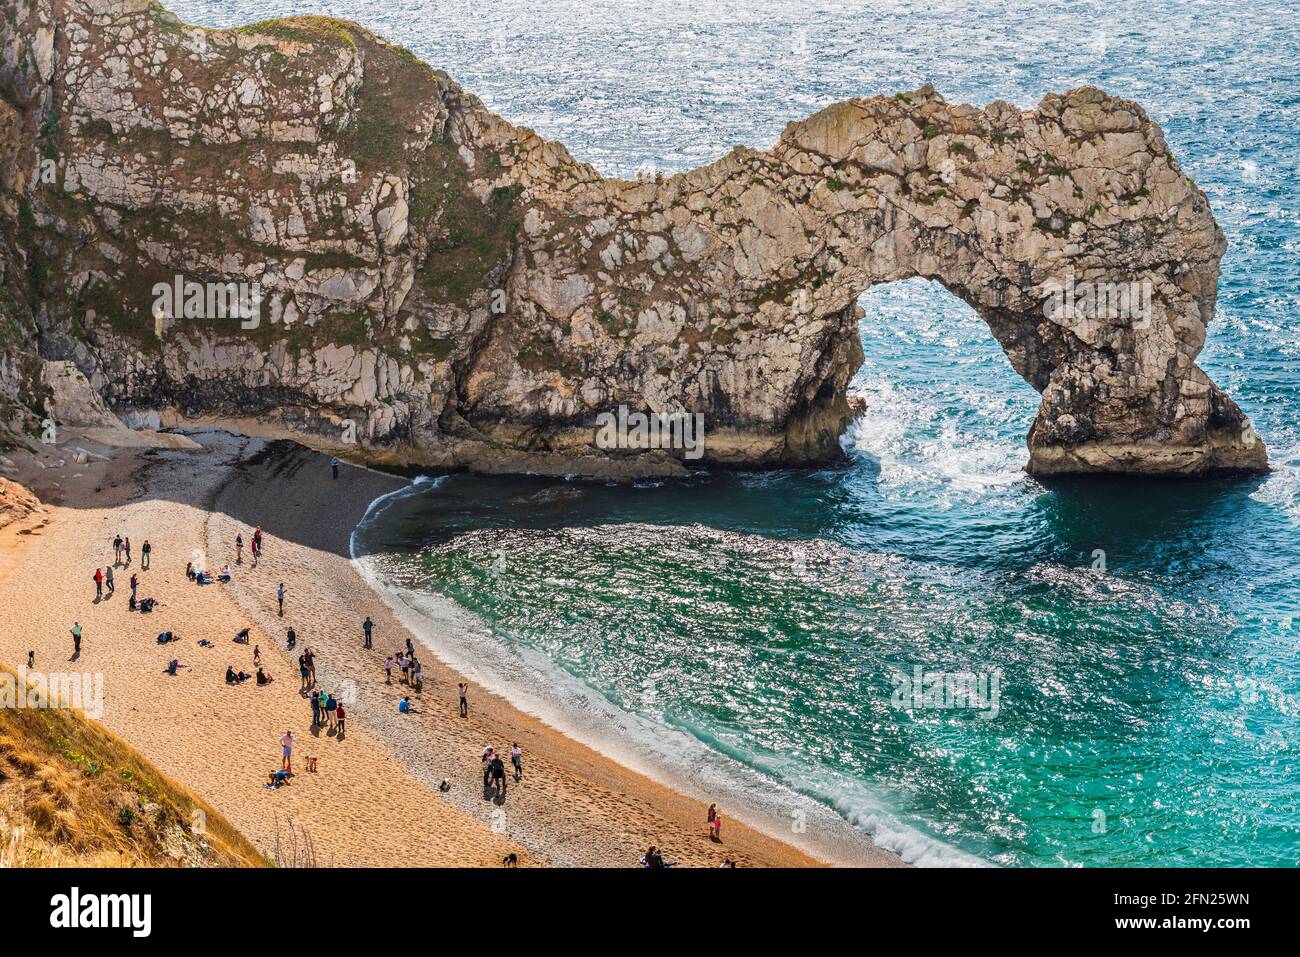 The rock formation Durdle Door on the Jurassic coast in Dorset, UK Stock Photo